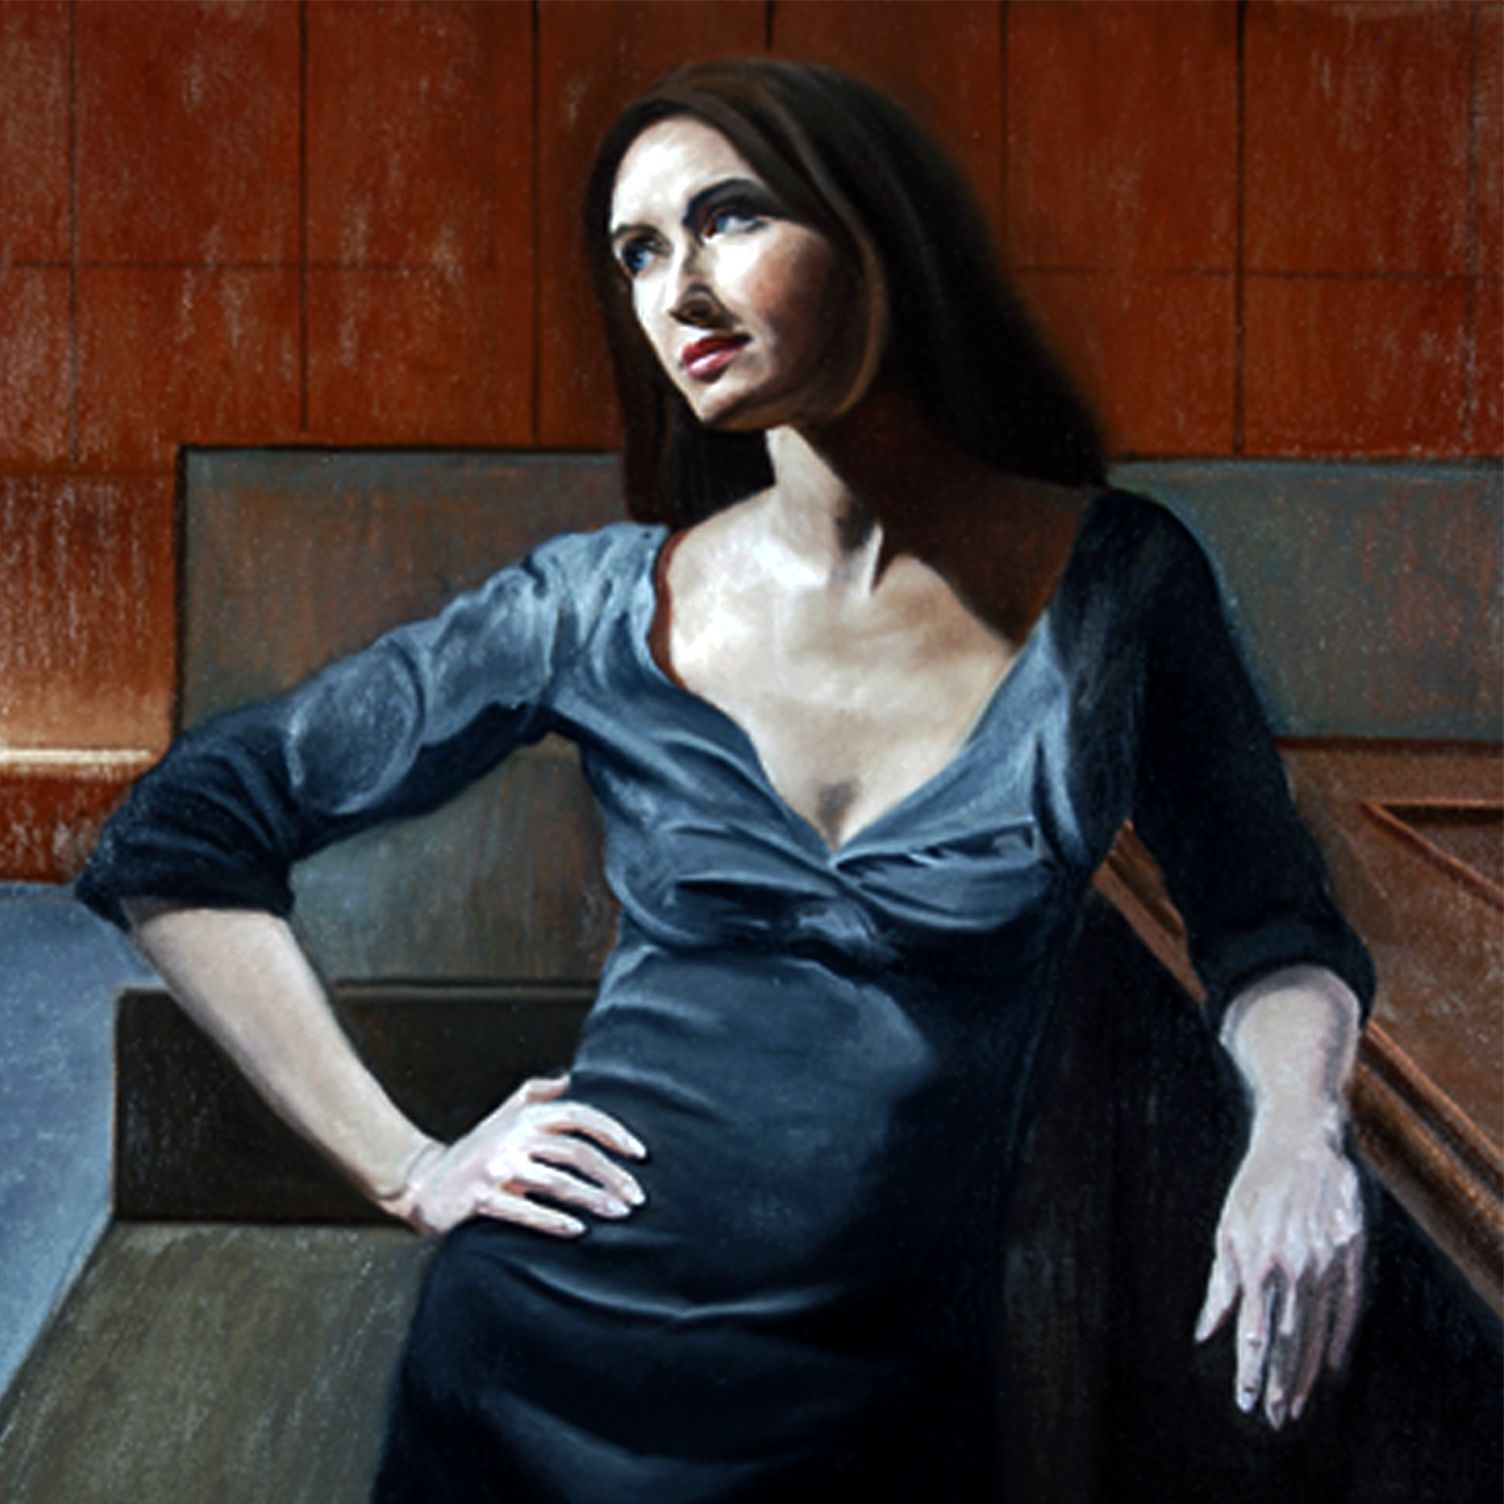 Woman at The Bar | Figurative Oil Painting by John Varriano